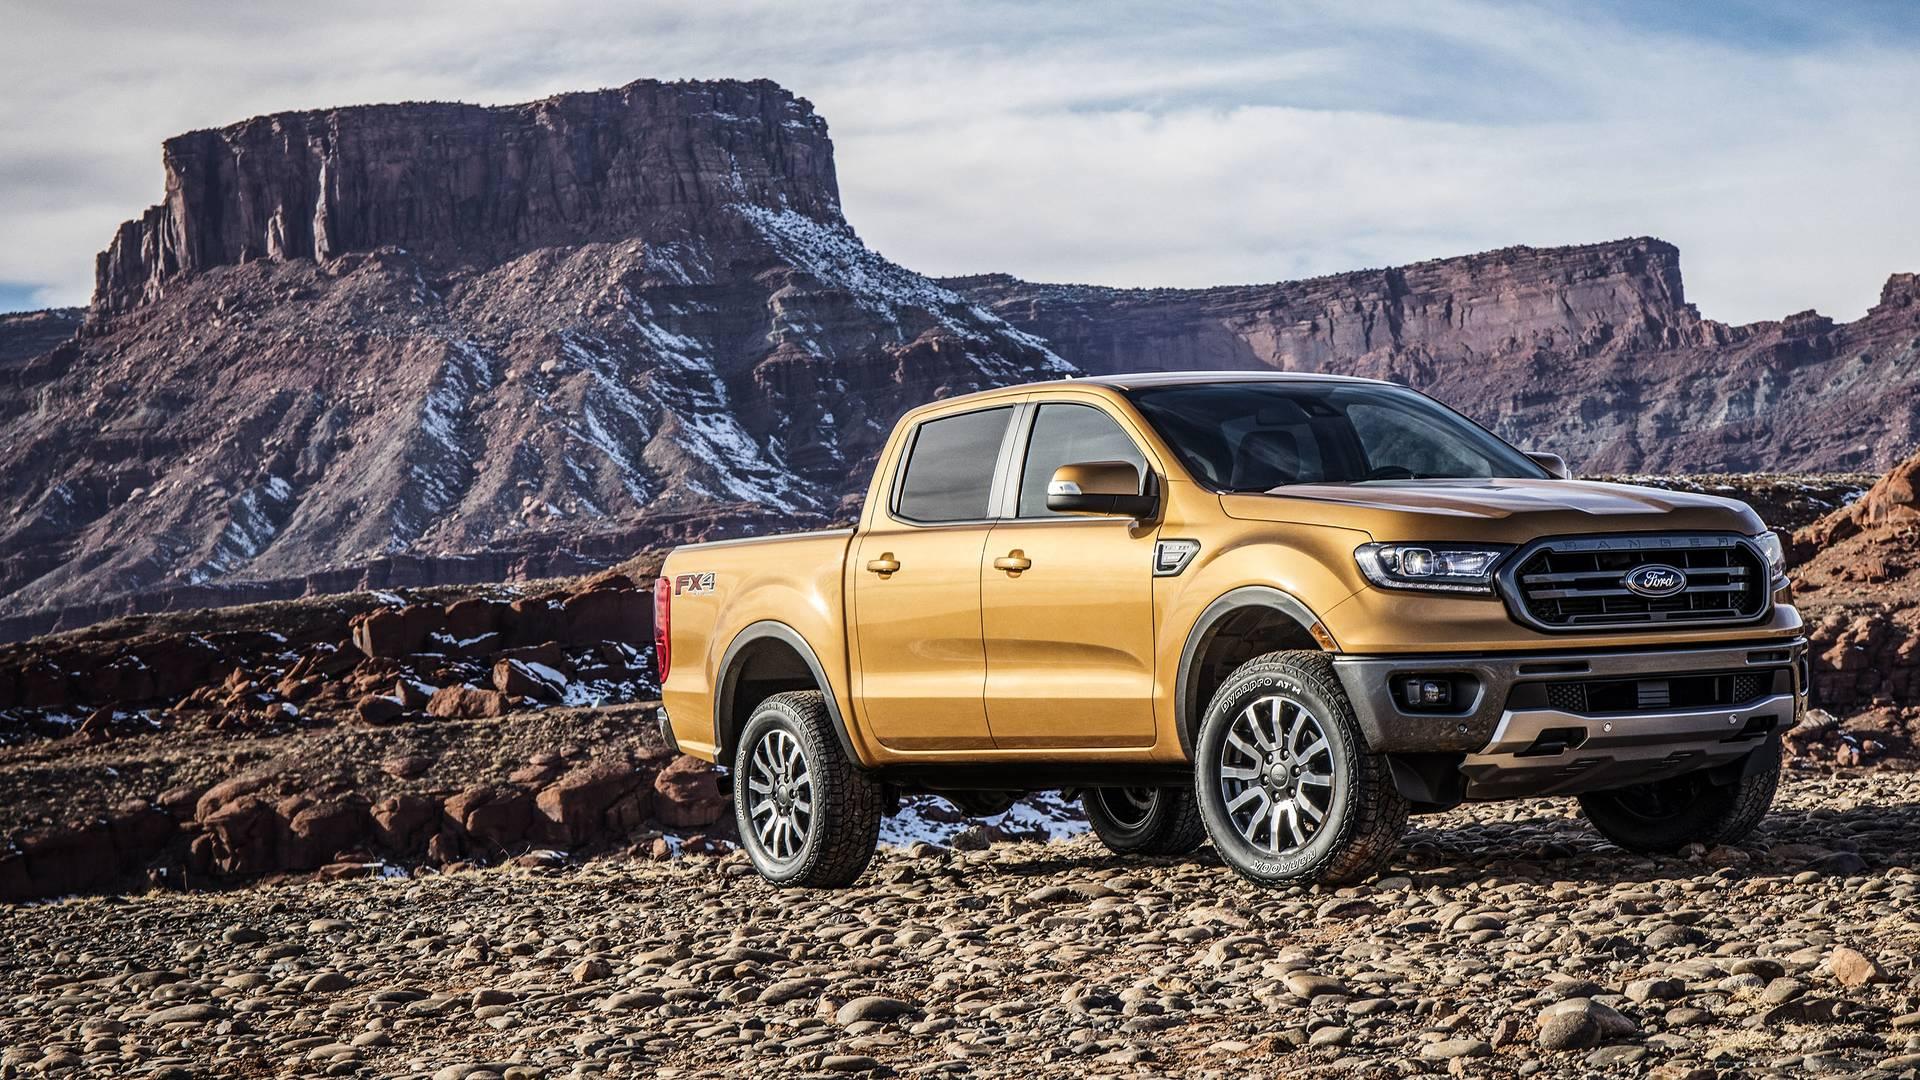 Ford Ranger for North America just released